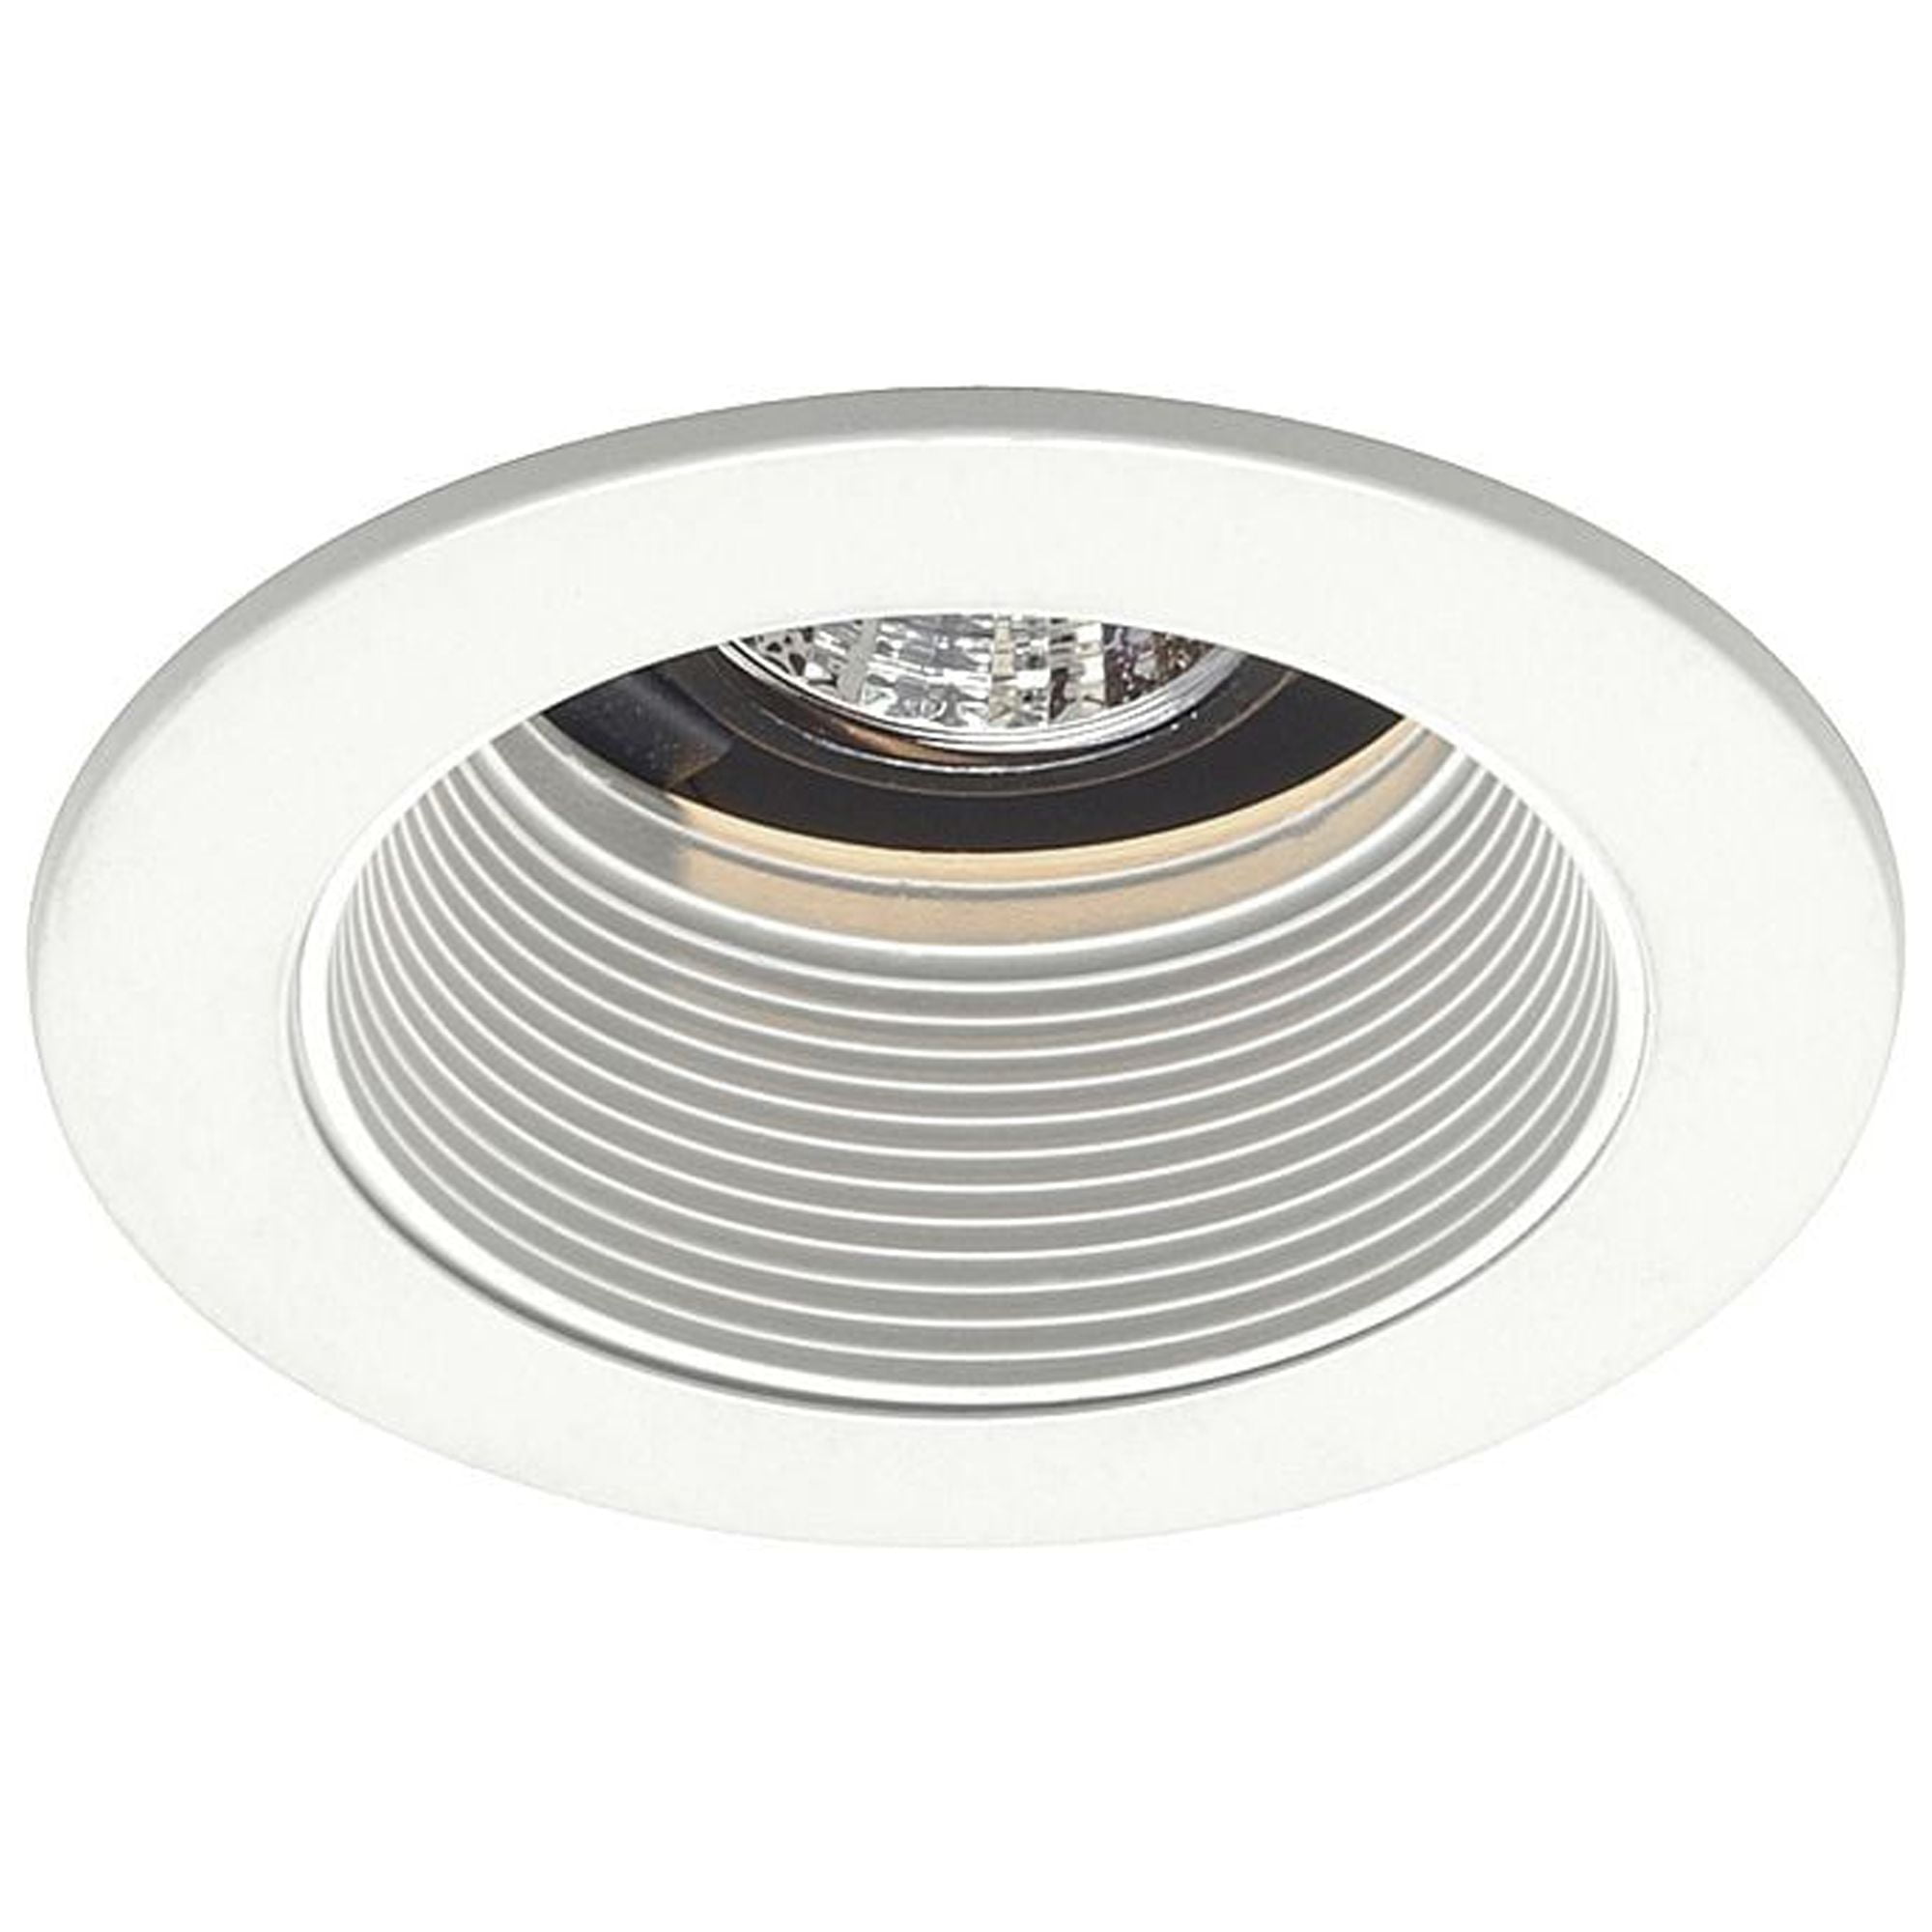 Low Voltage White Baffle Recessed Light